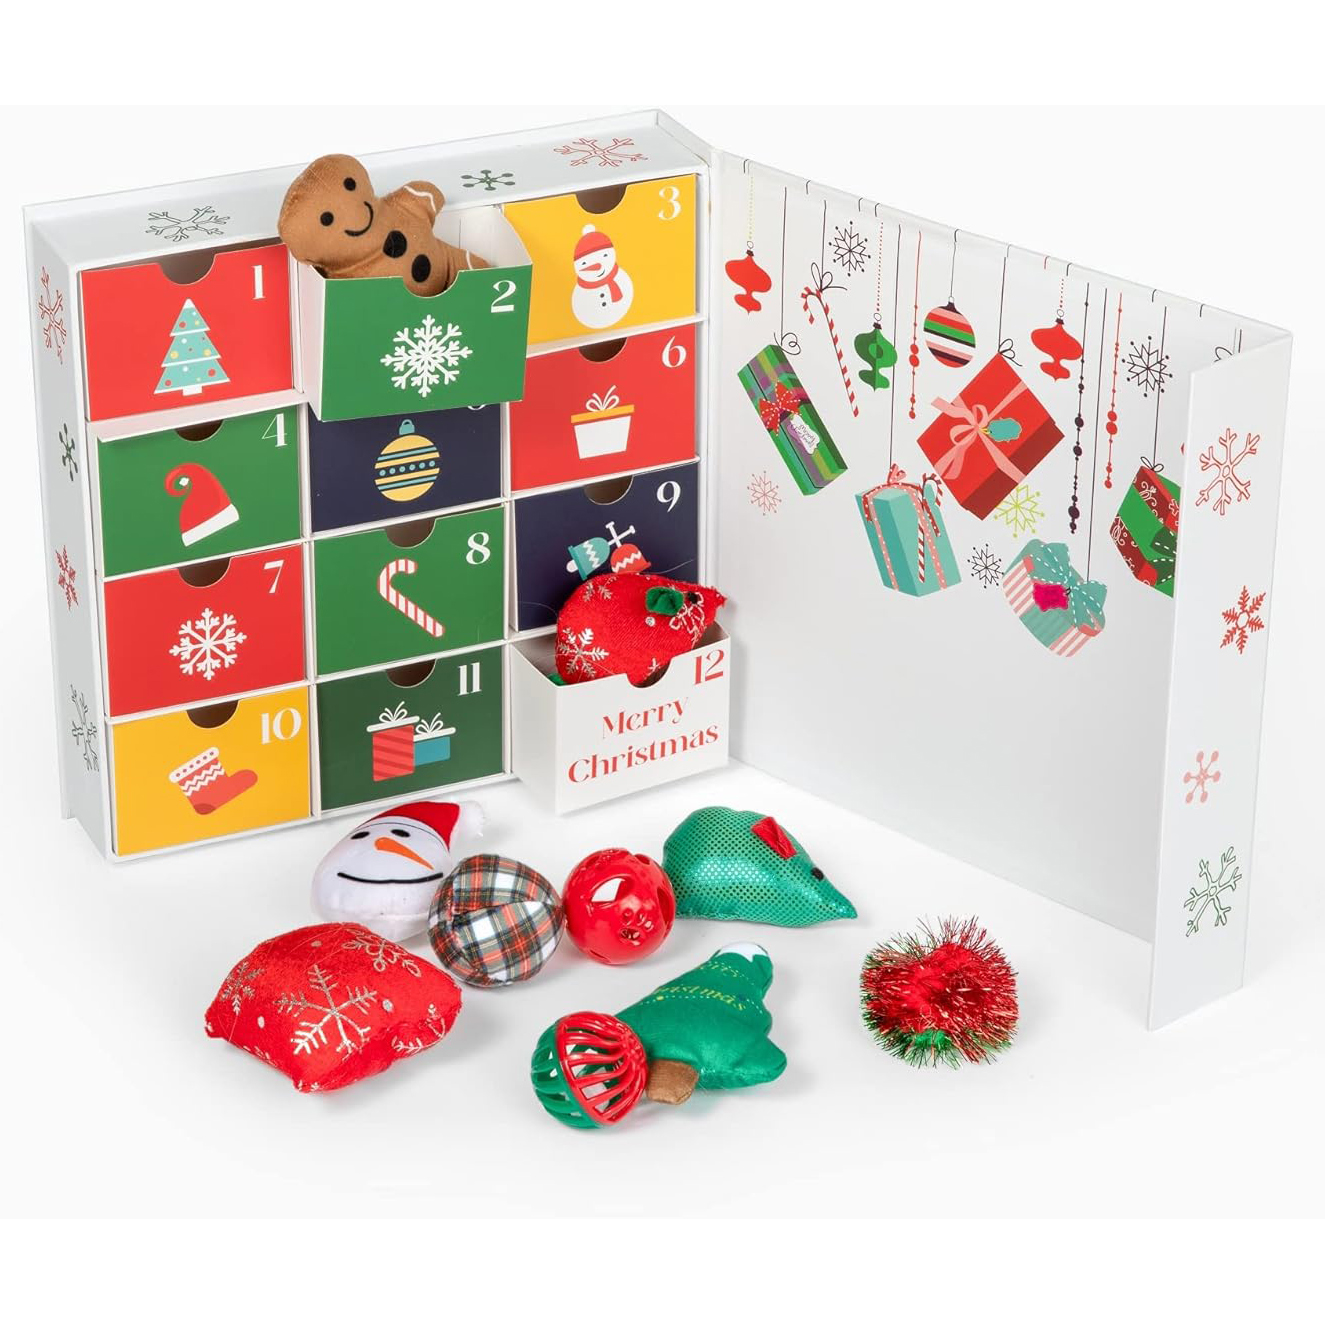 Midlee Cat Advent Calendar - 12 Days of Christmas Filled Cat Toy Gift